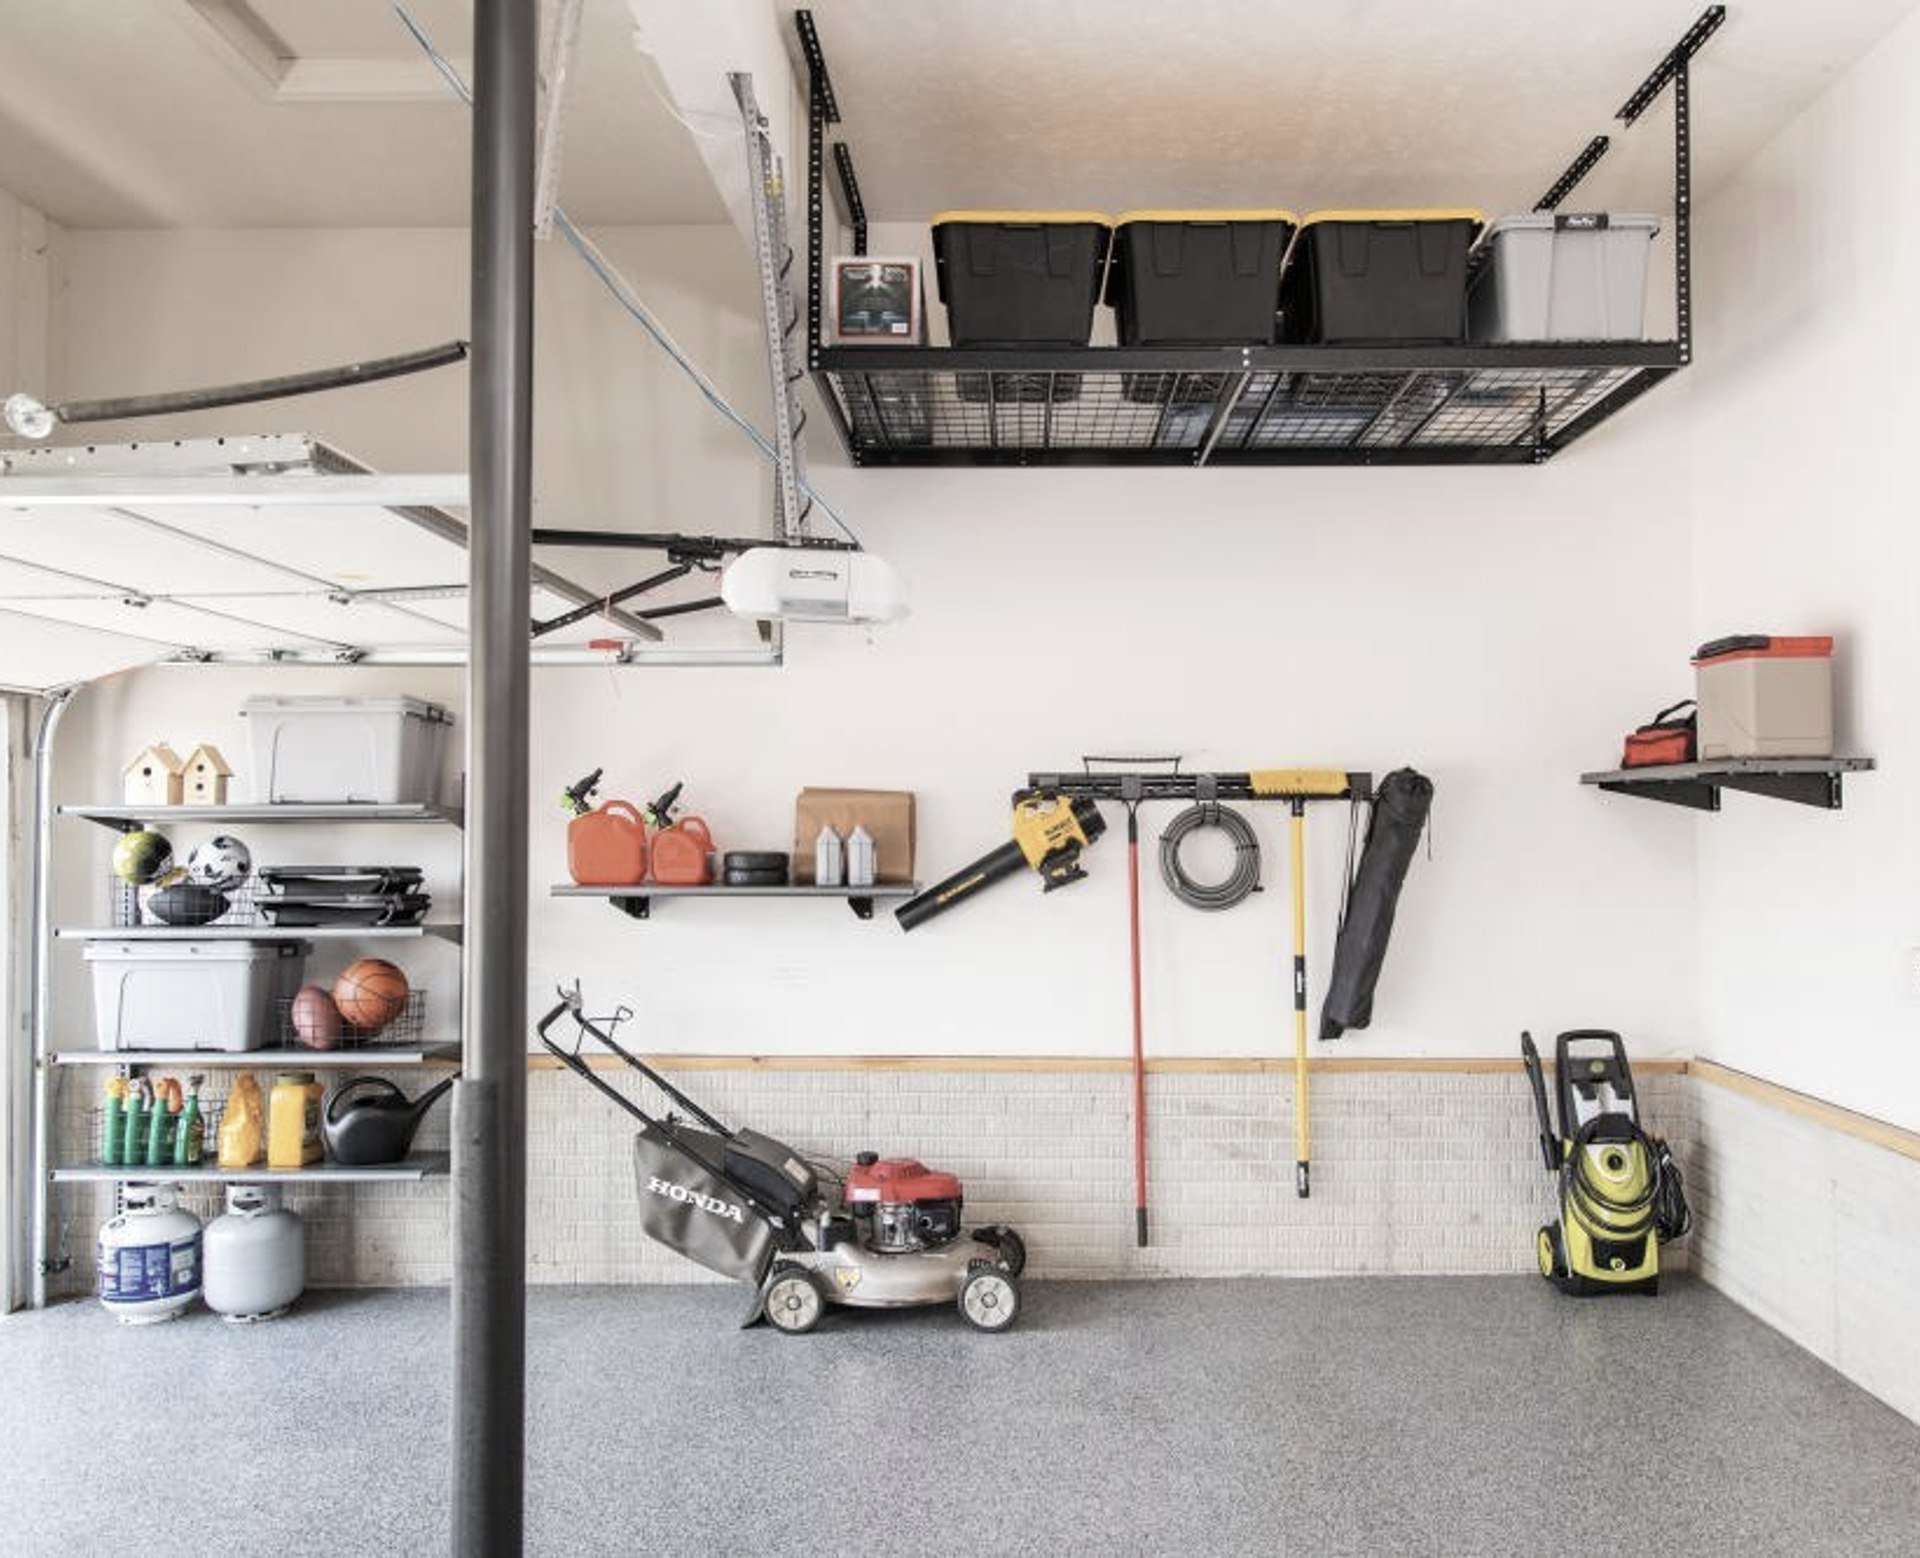 Out of sight, out of mind: 22 Ceiling storage ideas for the garage | ArchiPro AU